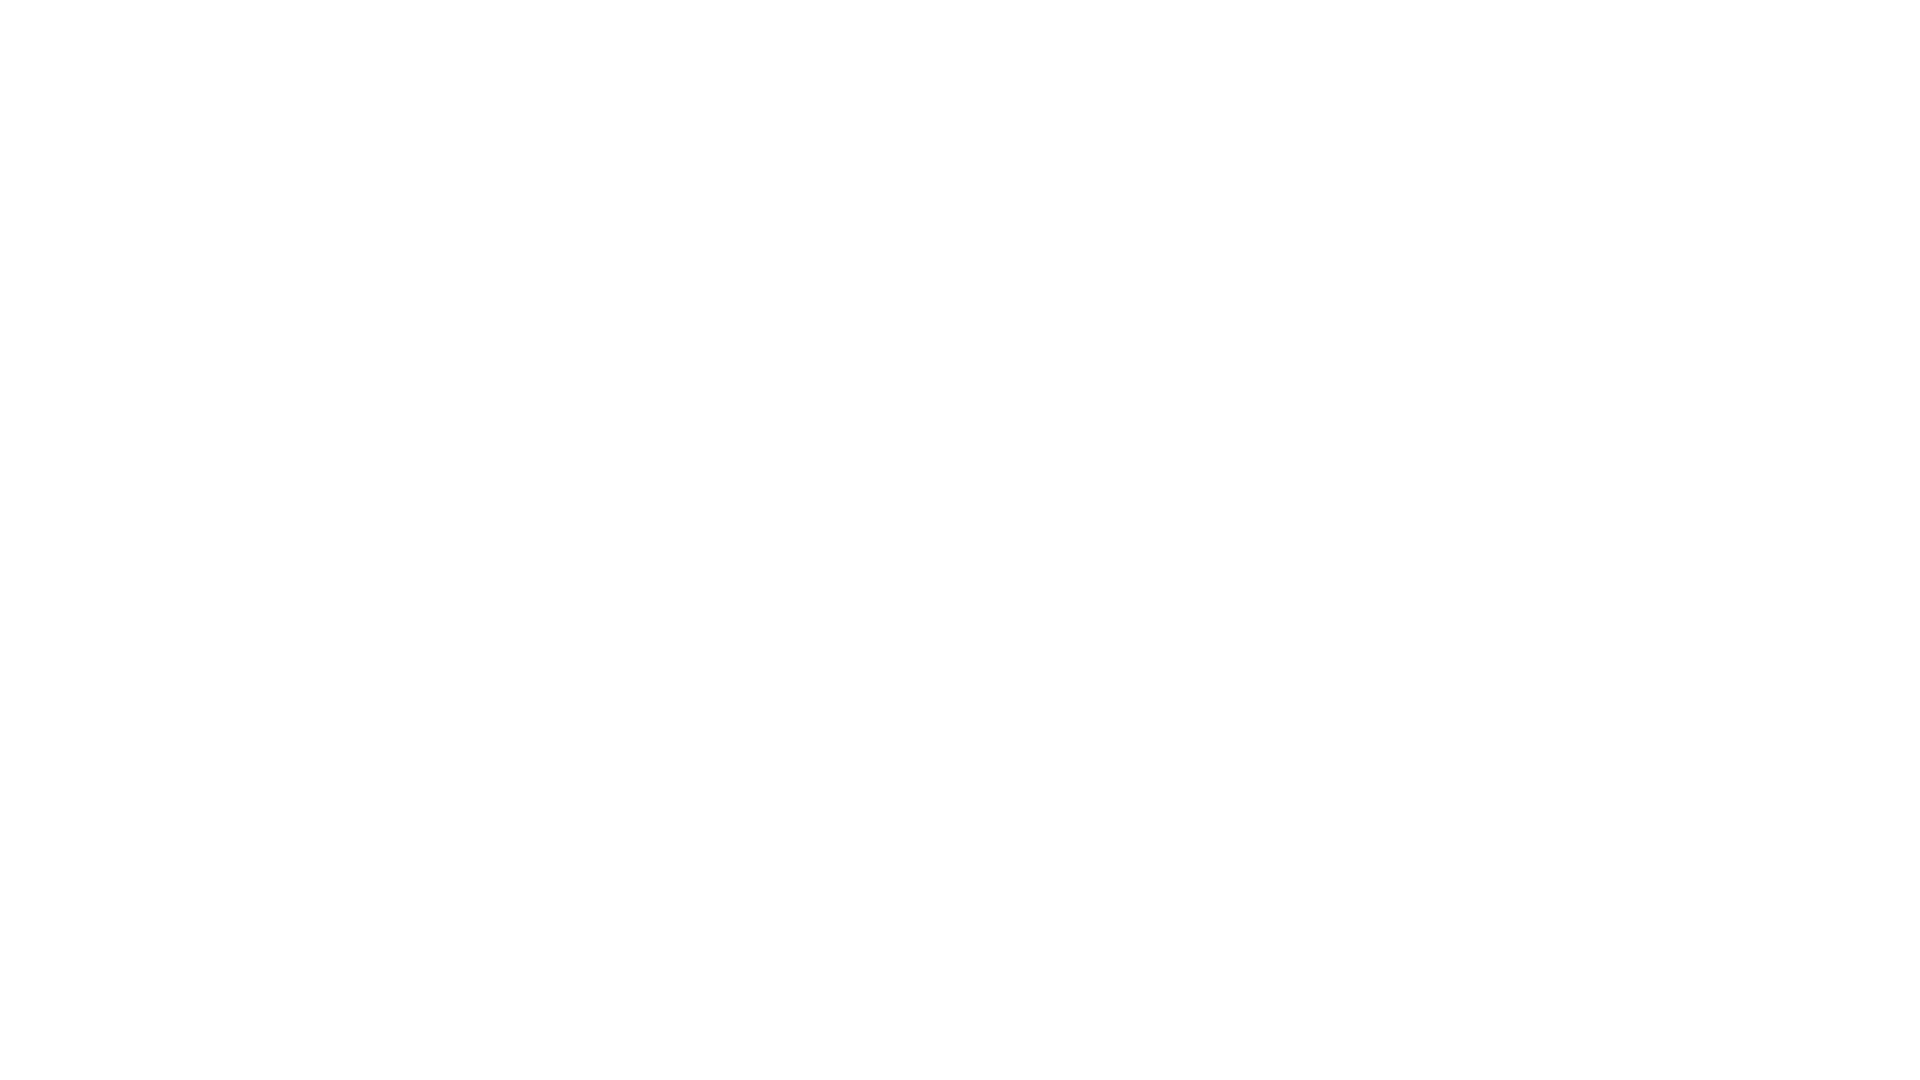 The Stonegate Group logo, written in a serif font on a plain background.